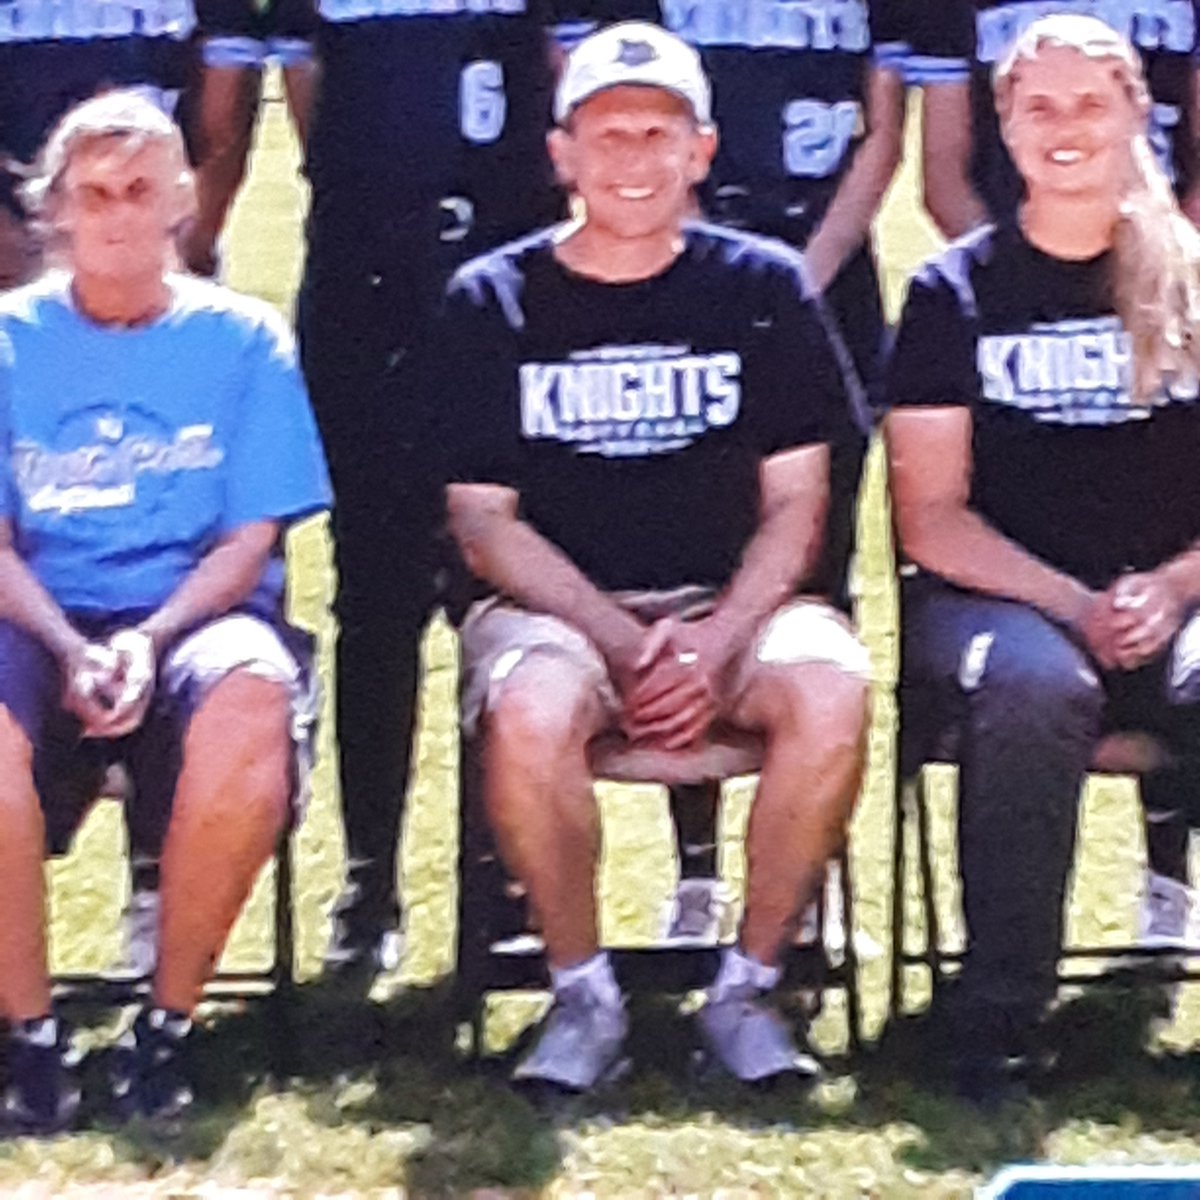 NPsoftball #Team22 National Coaches Day Thank you to the best coaches in the State. It's been awesome to work with you. You are truly STATE CHAMPIONSHIP COACHES #TRADITION #ATTITUDE #TWOPEAT